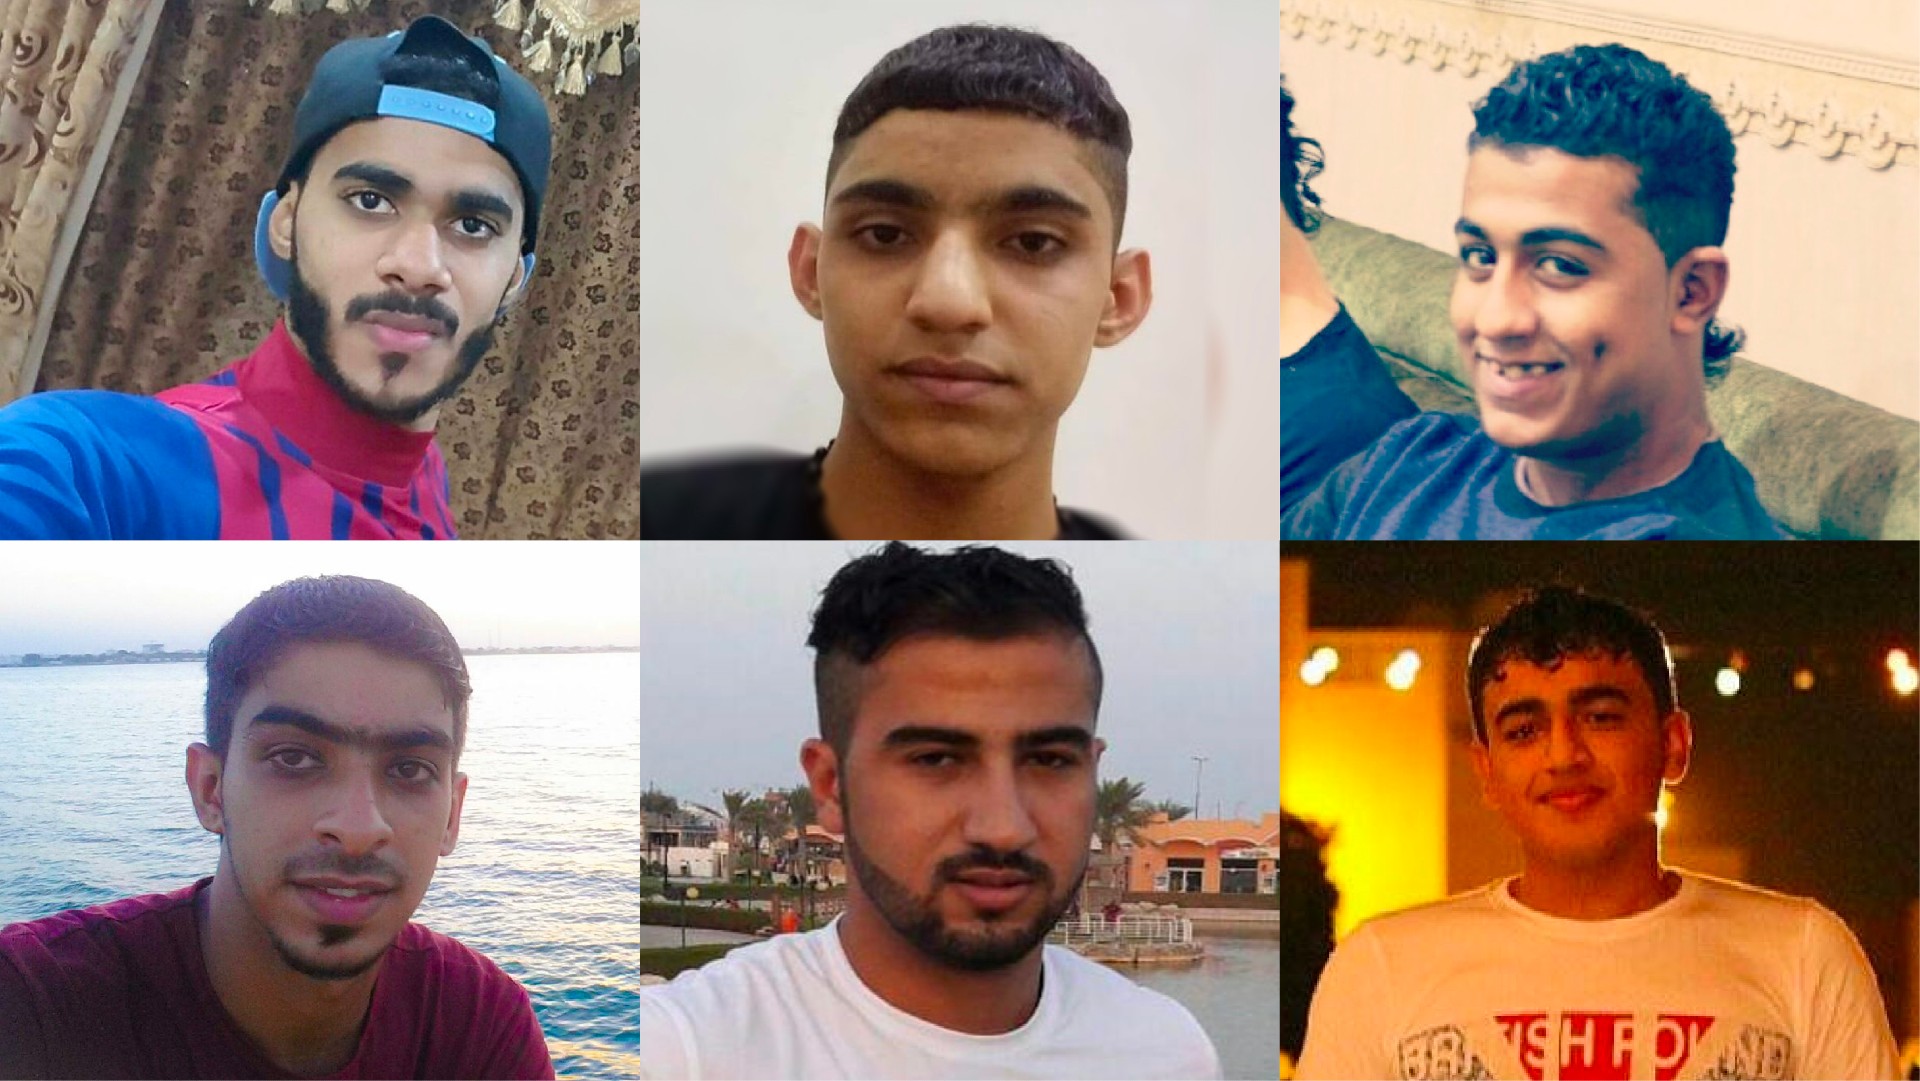 Six Bahraini students arbitrarily detained, according to UN Working Group